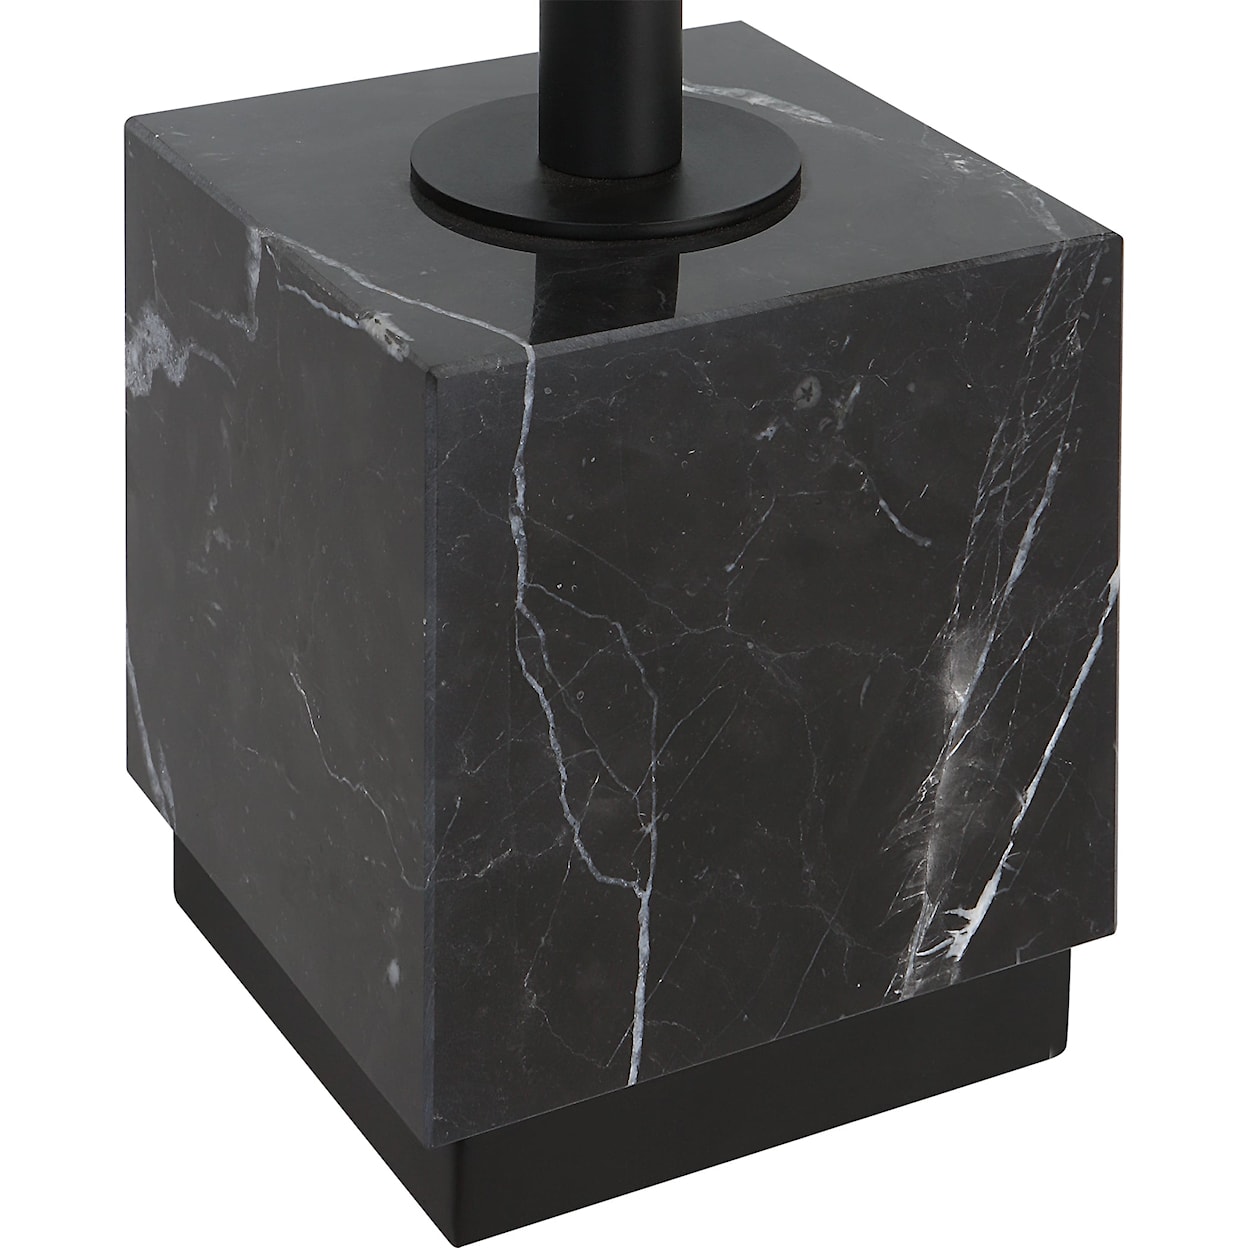 Uttermost Escort Black Buffet Lamp with A Marble Block Foot